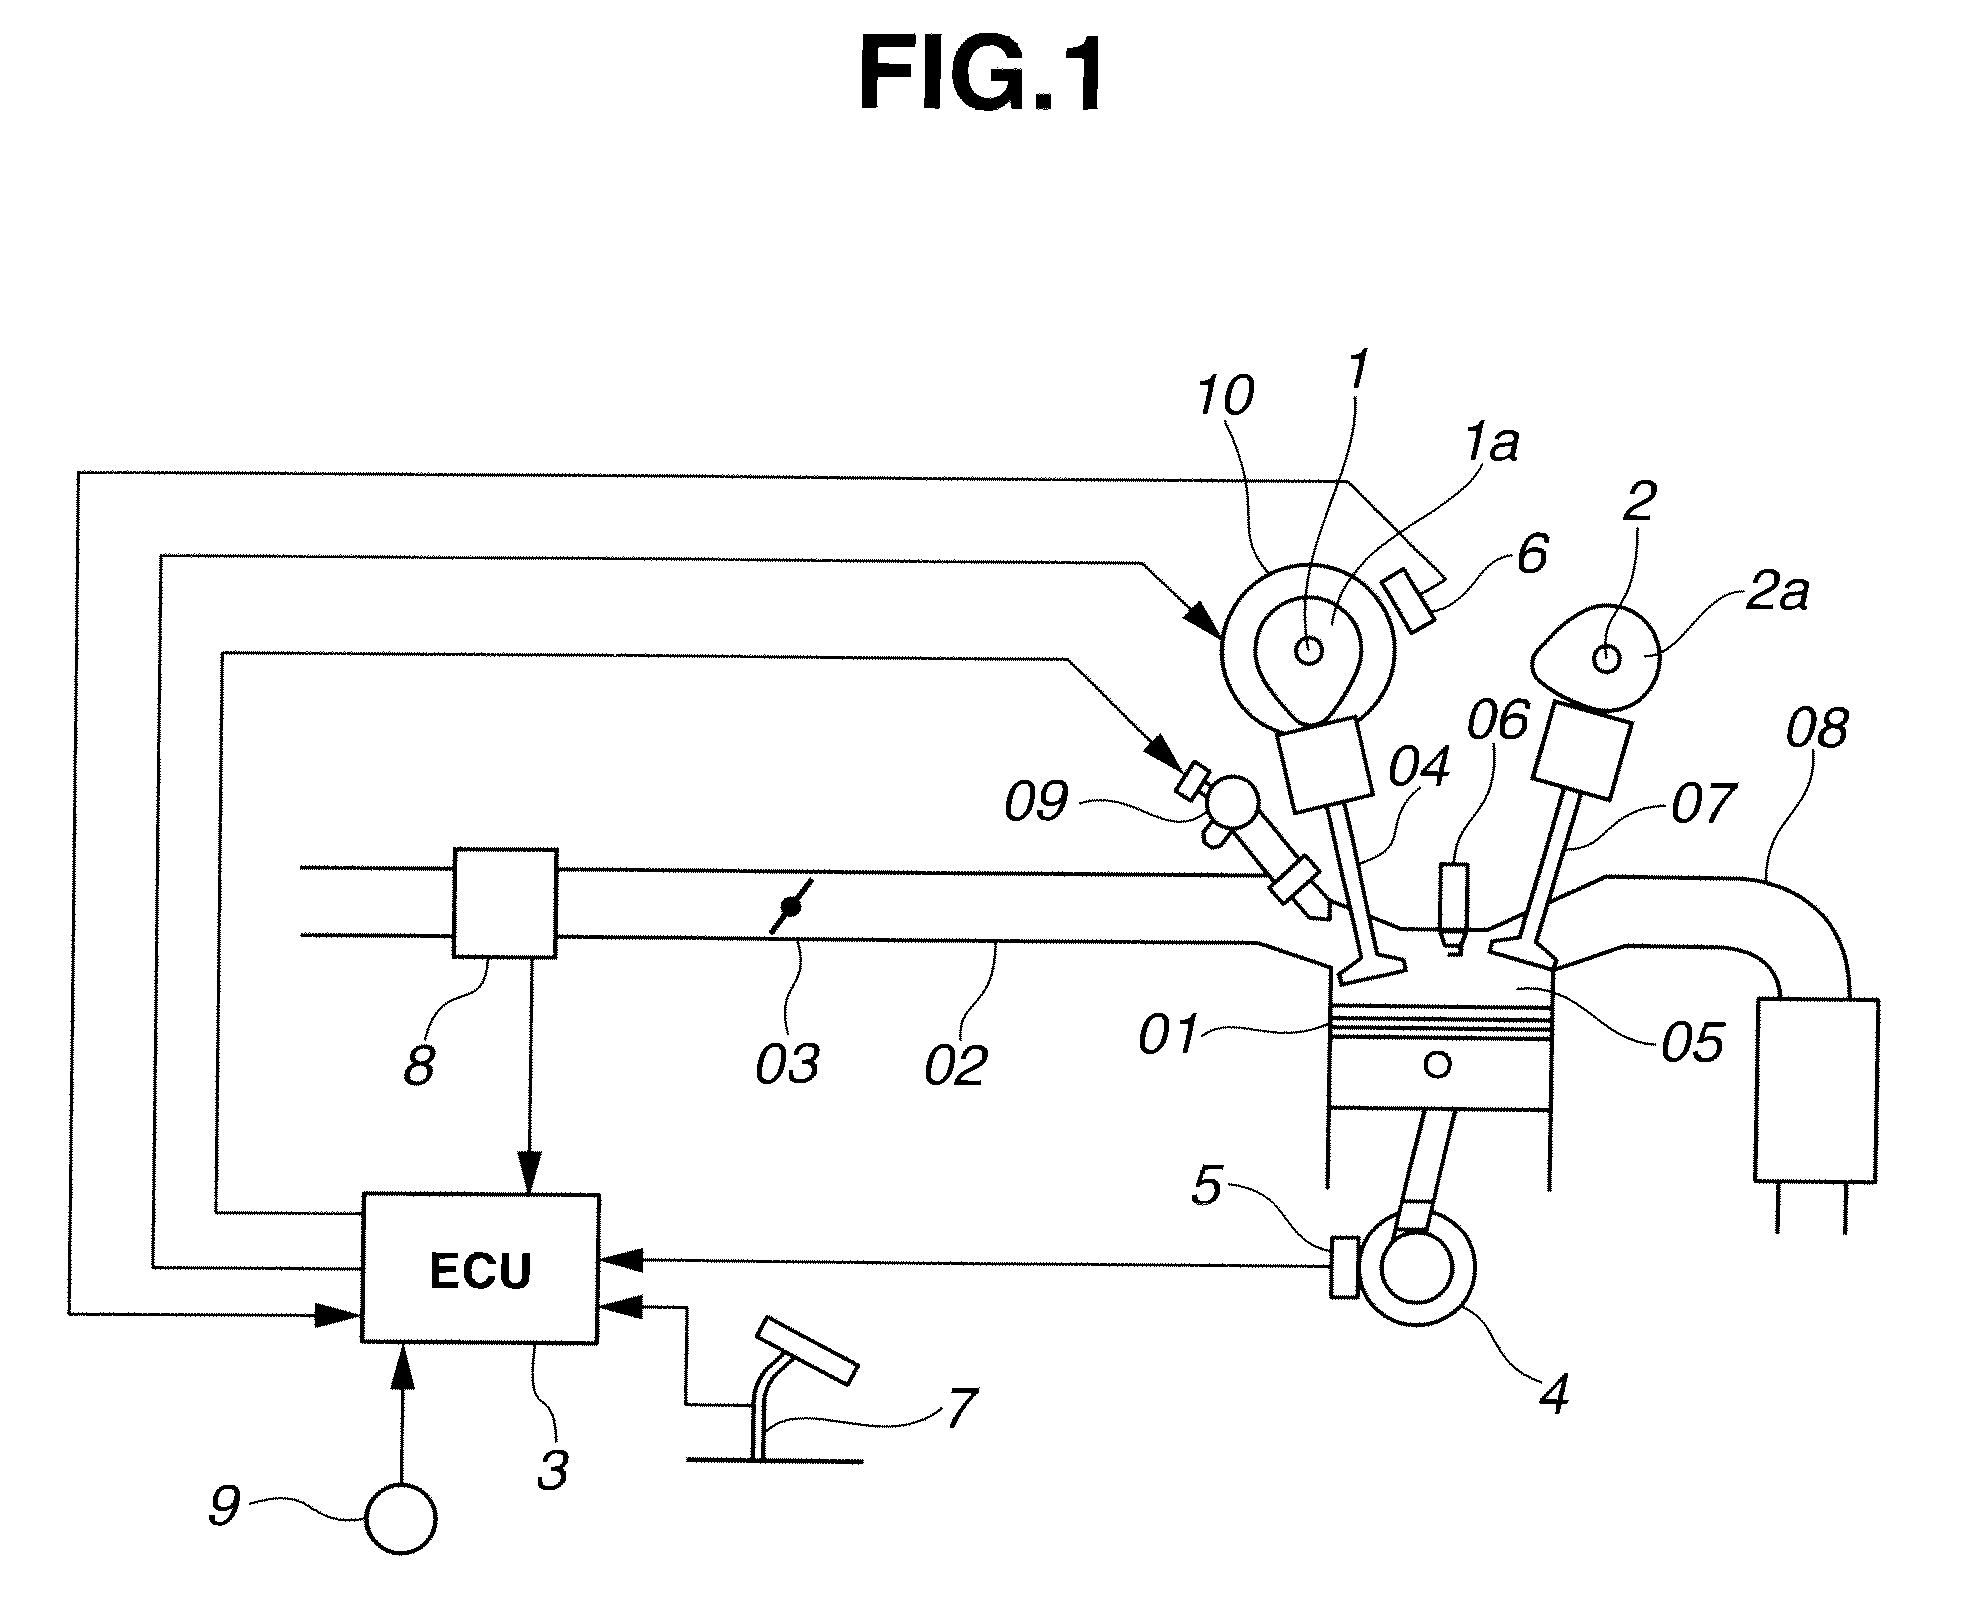 Valve timing control apparatus for internal combustion engine